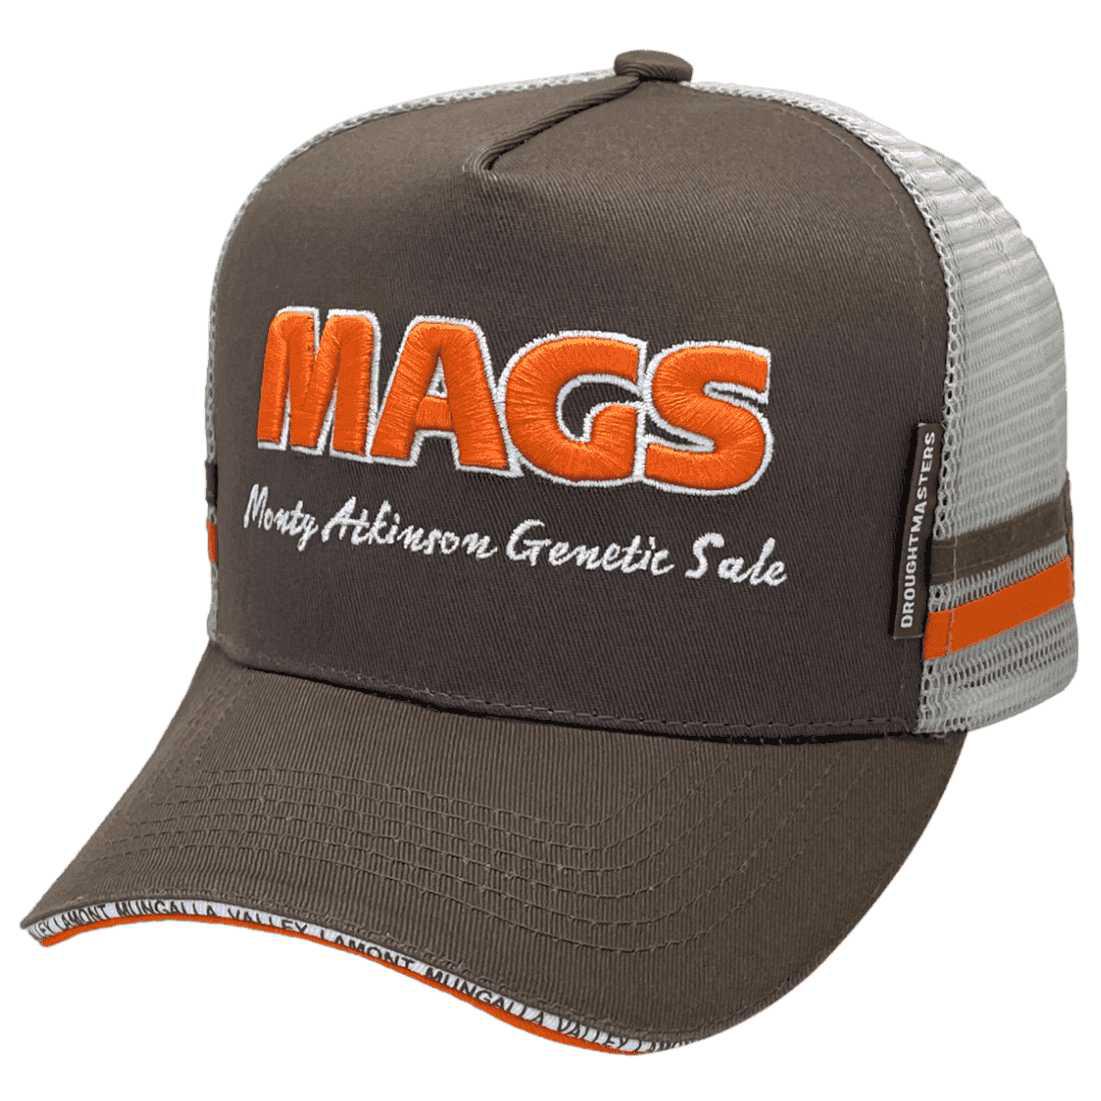 MAGS Monty Atkinson Genetic Sale Ipswich Qld HP Original Power Aussie Trucker Hat with Australian Head Fit Crown and Double Sidebands